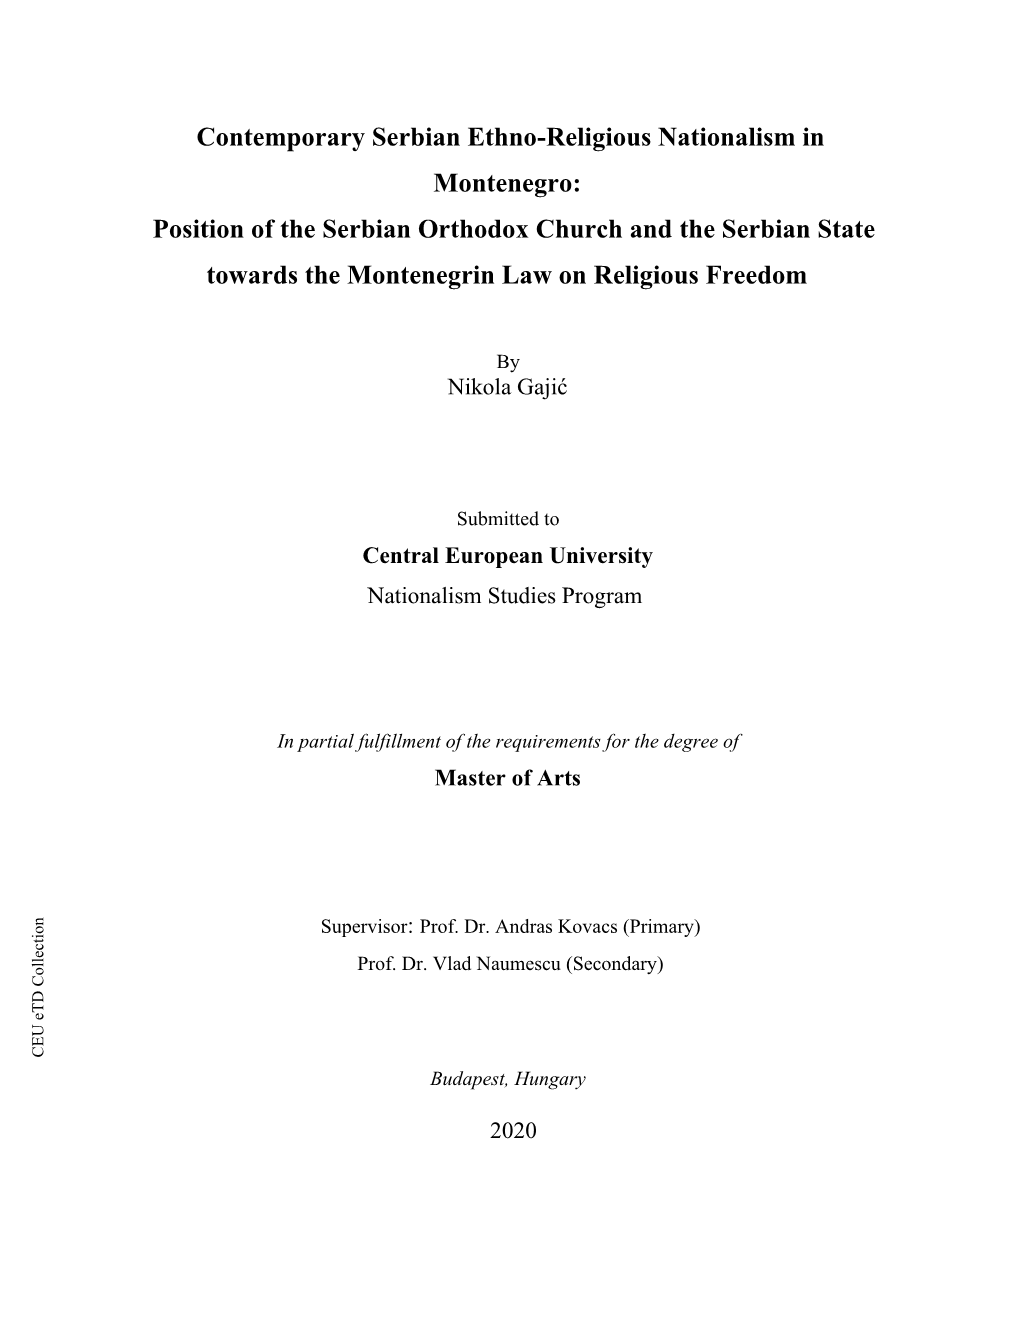 Contemporary Serbian Ethno-Religious Nationalism in Montenegro: Position of the Serbian Orthodox Church and the Serbian State To